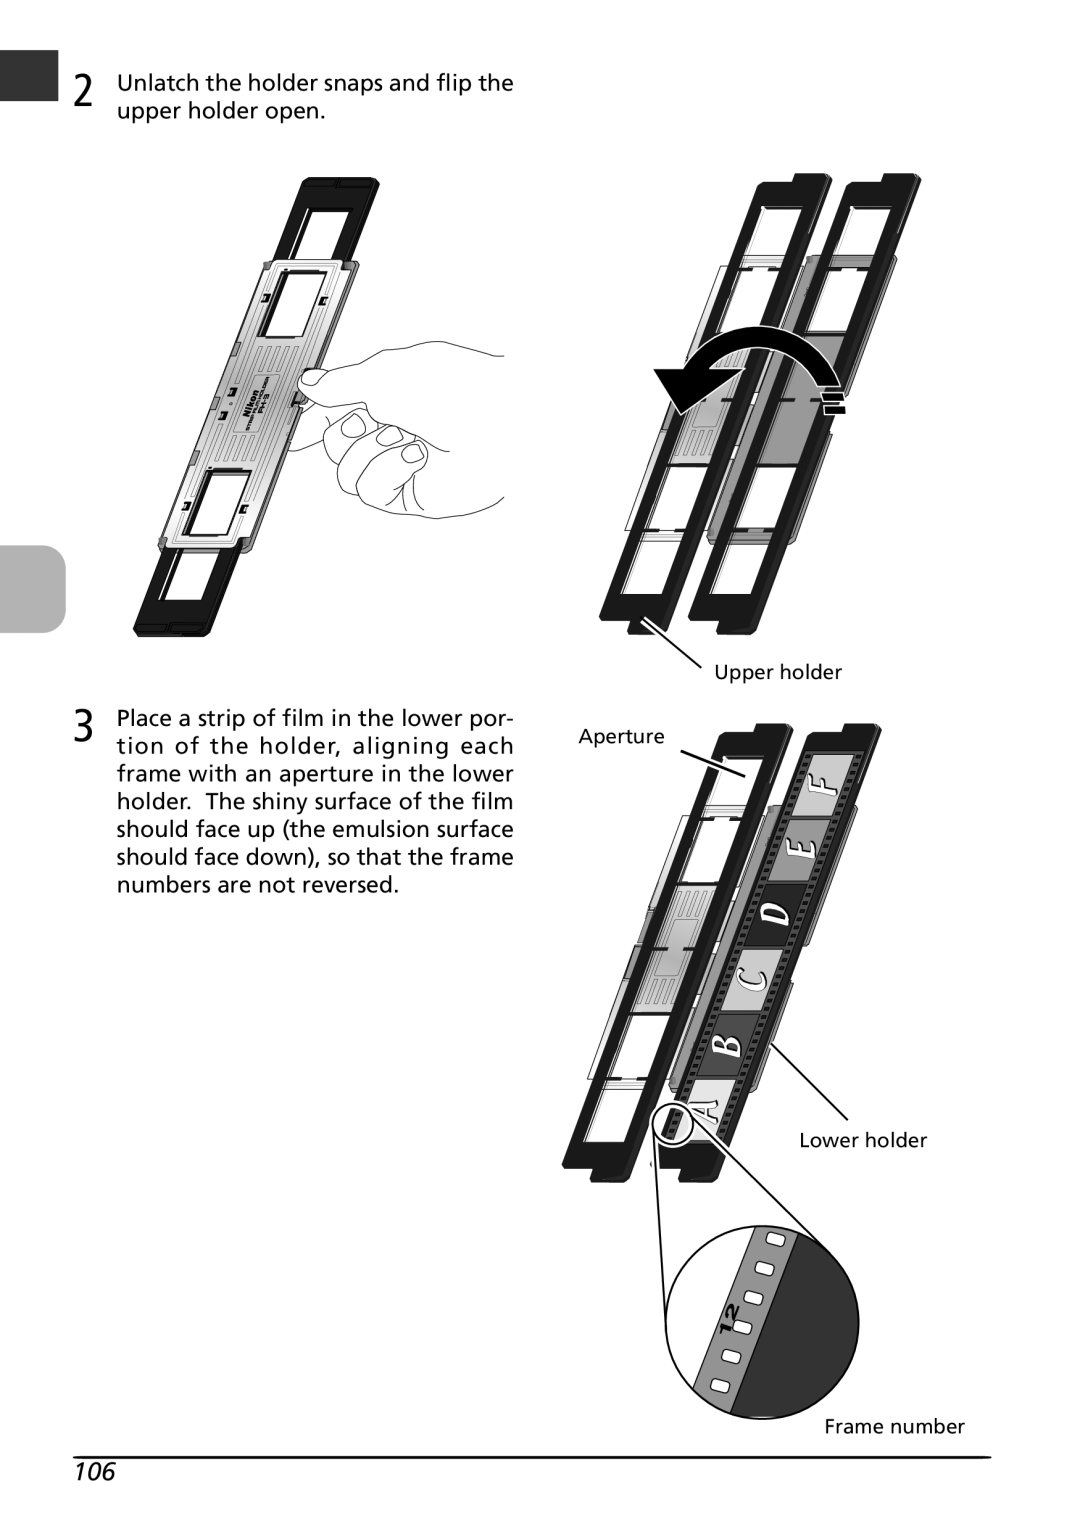 Nikon LS4000 user manual Unlatch the holder snaps and flip the, upper holder open, Place a strip of film in the lower por 